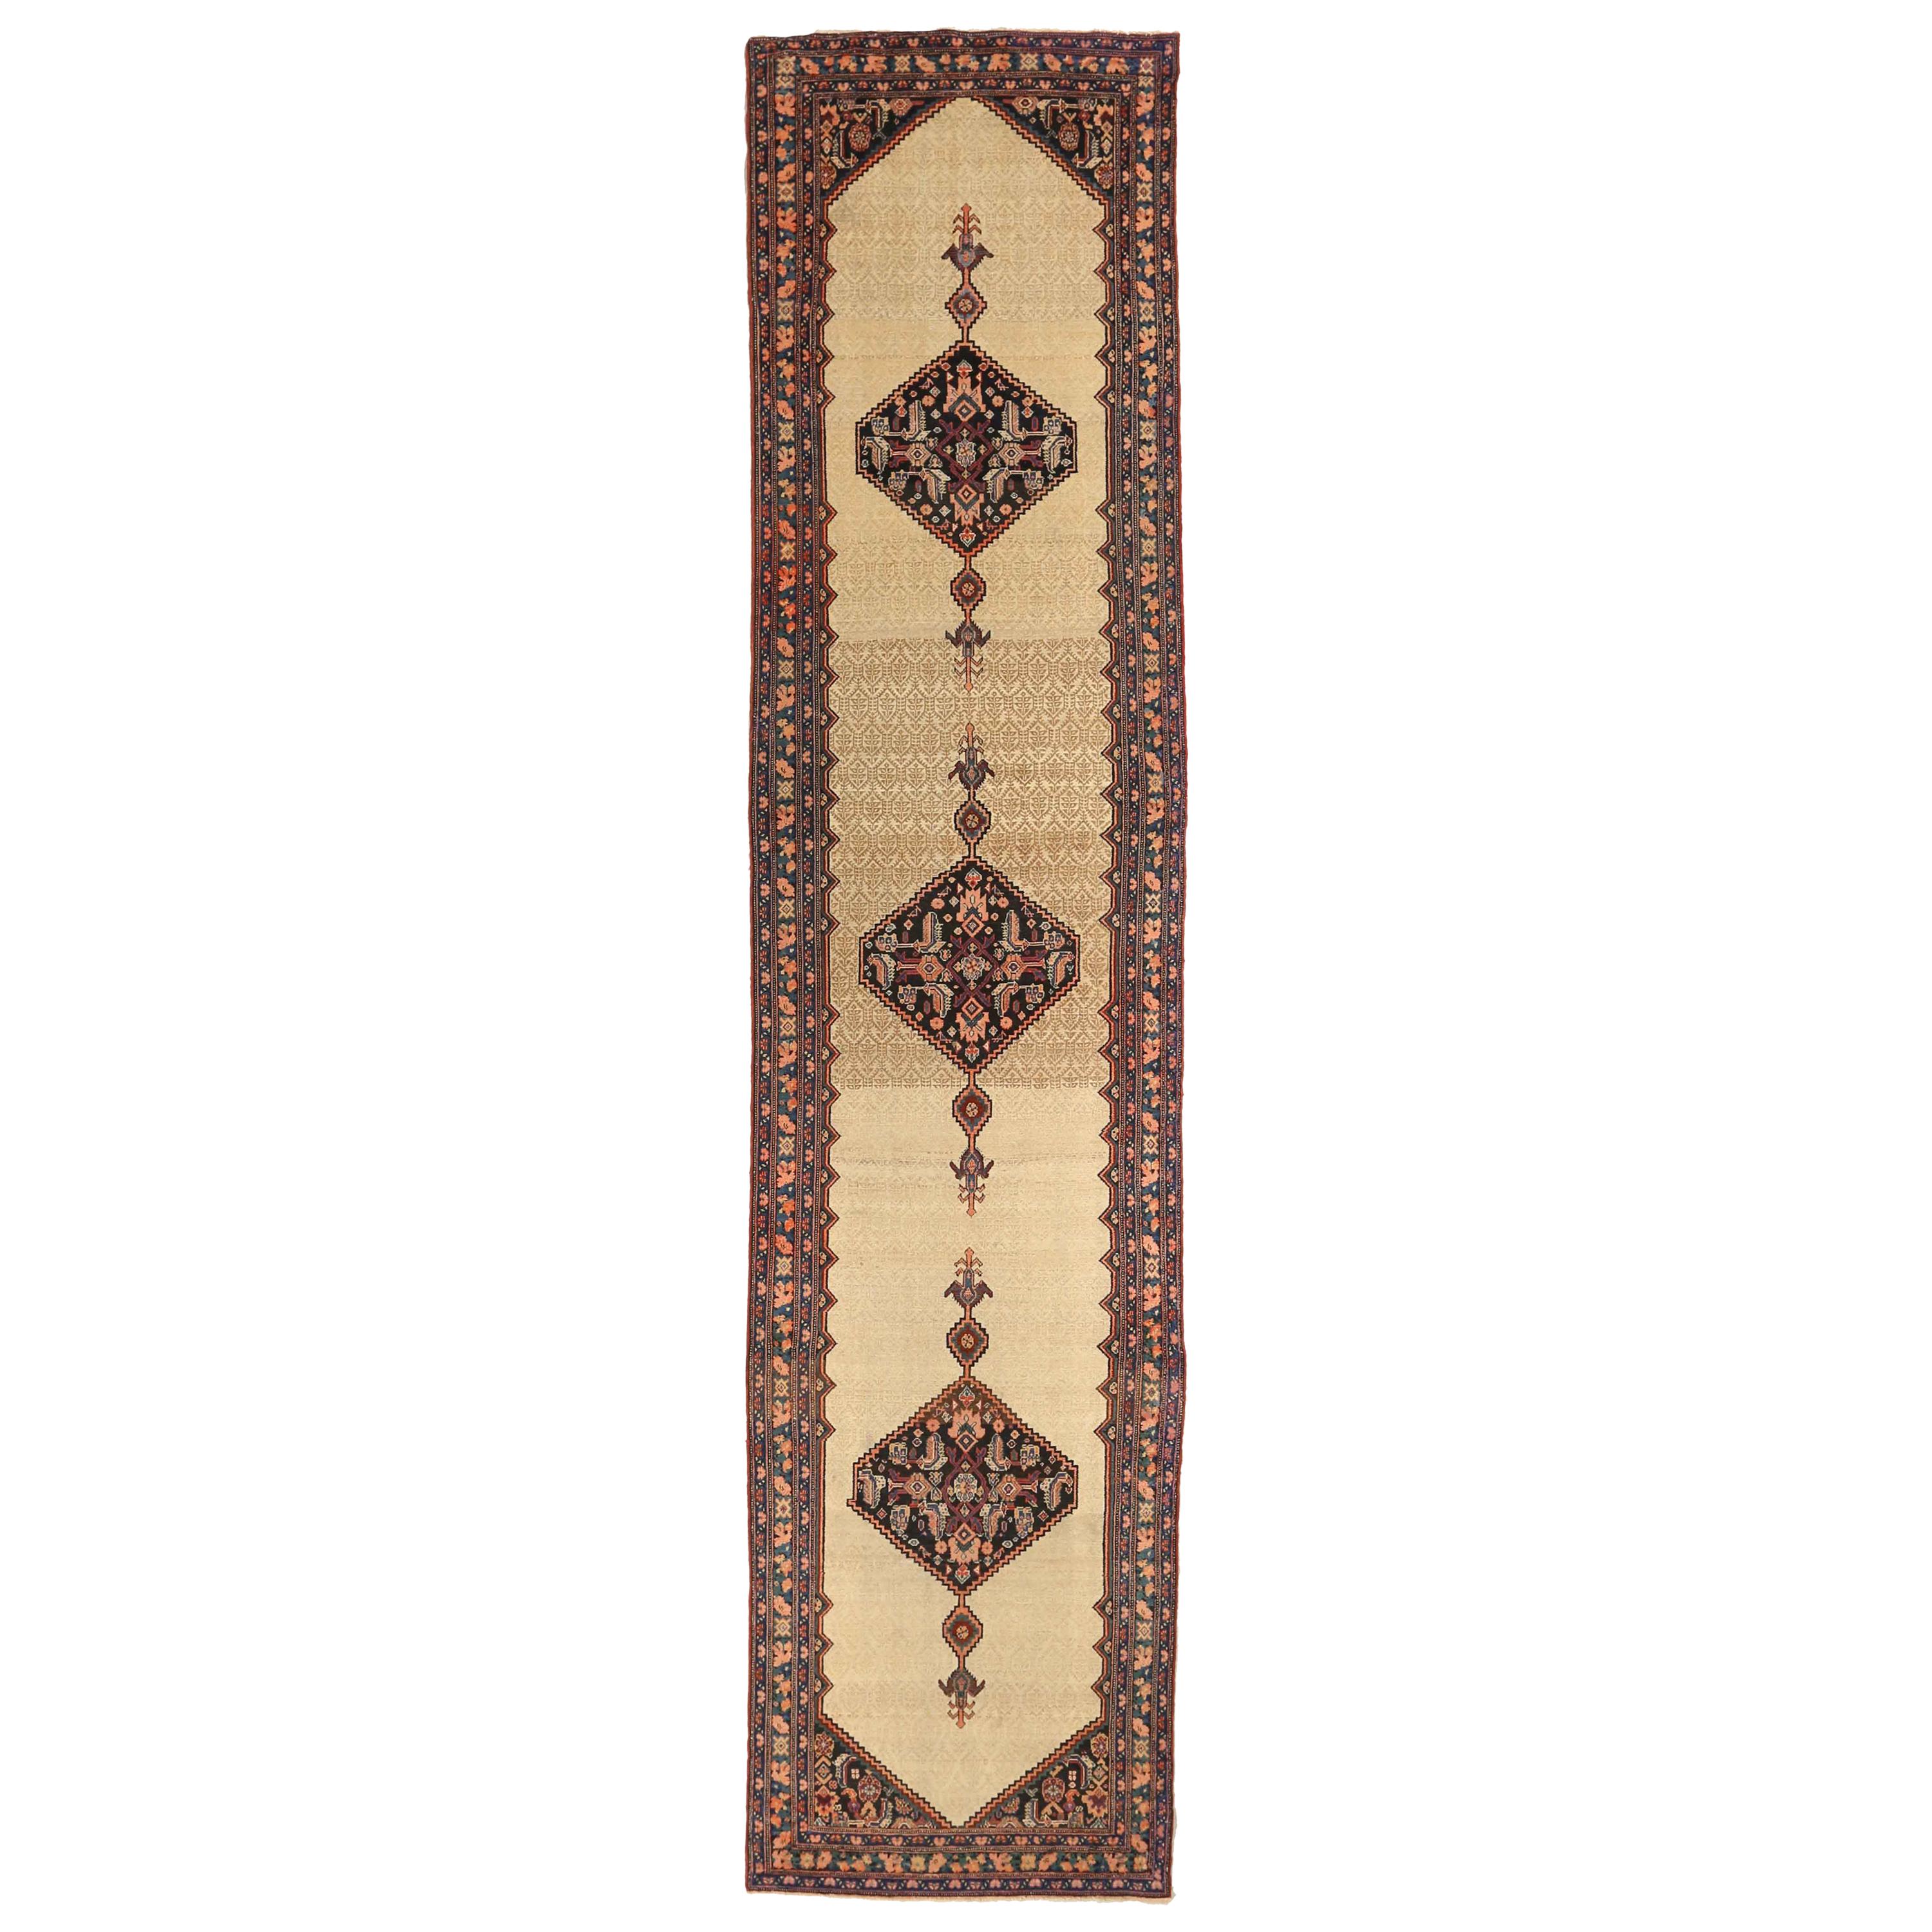 1920s Antique Persian Rug Malayer Design with Grand Tribal and Floral Details For Sale